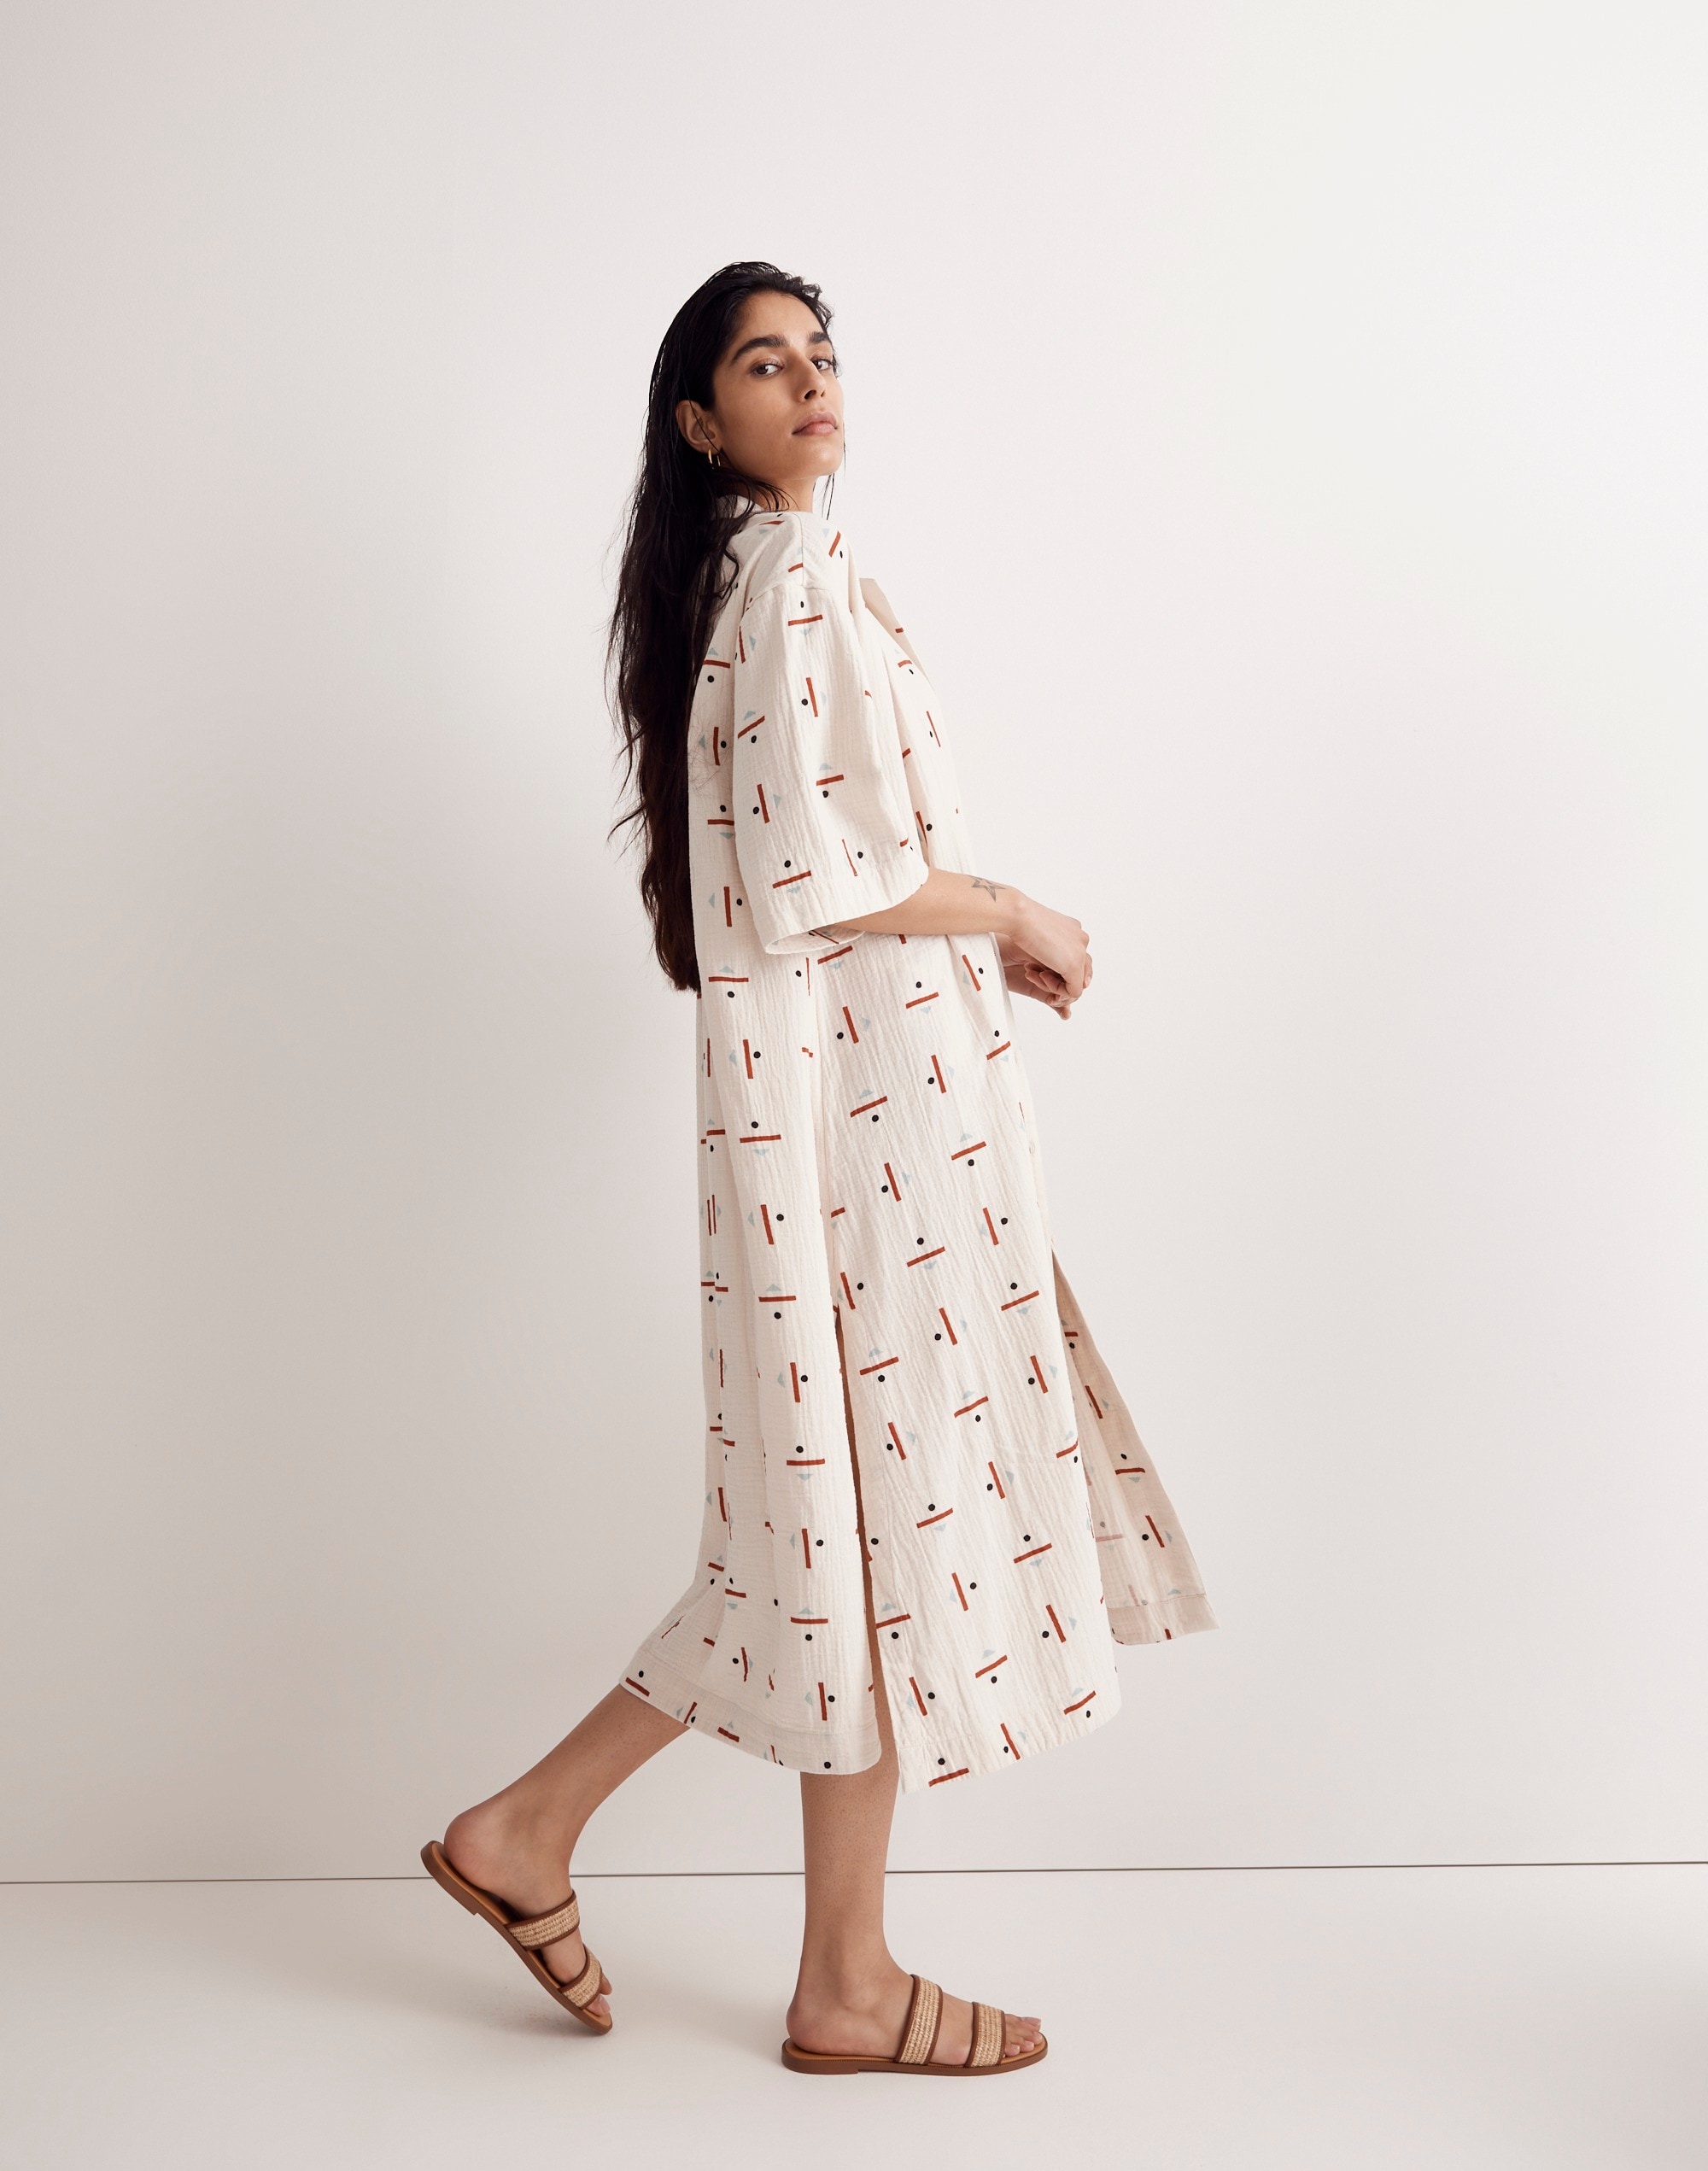 Madewell x Caroline Z Hurley Cover-Up Maxi Shirtdress in Abstract Alpha